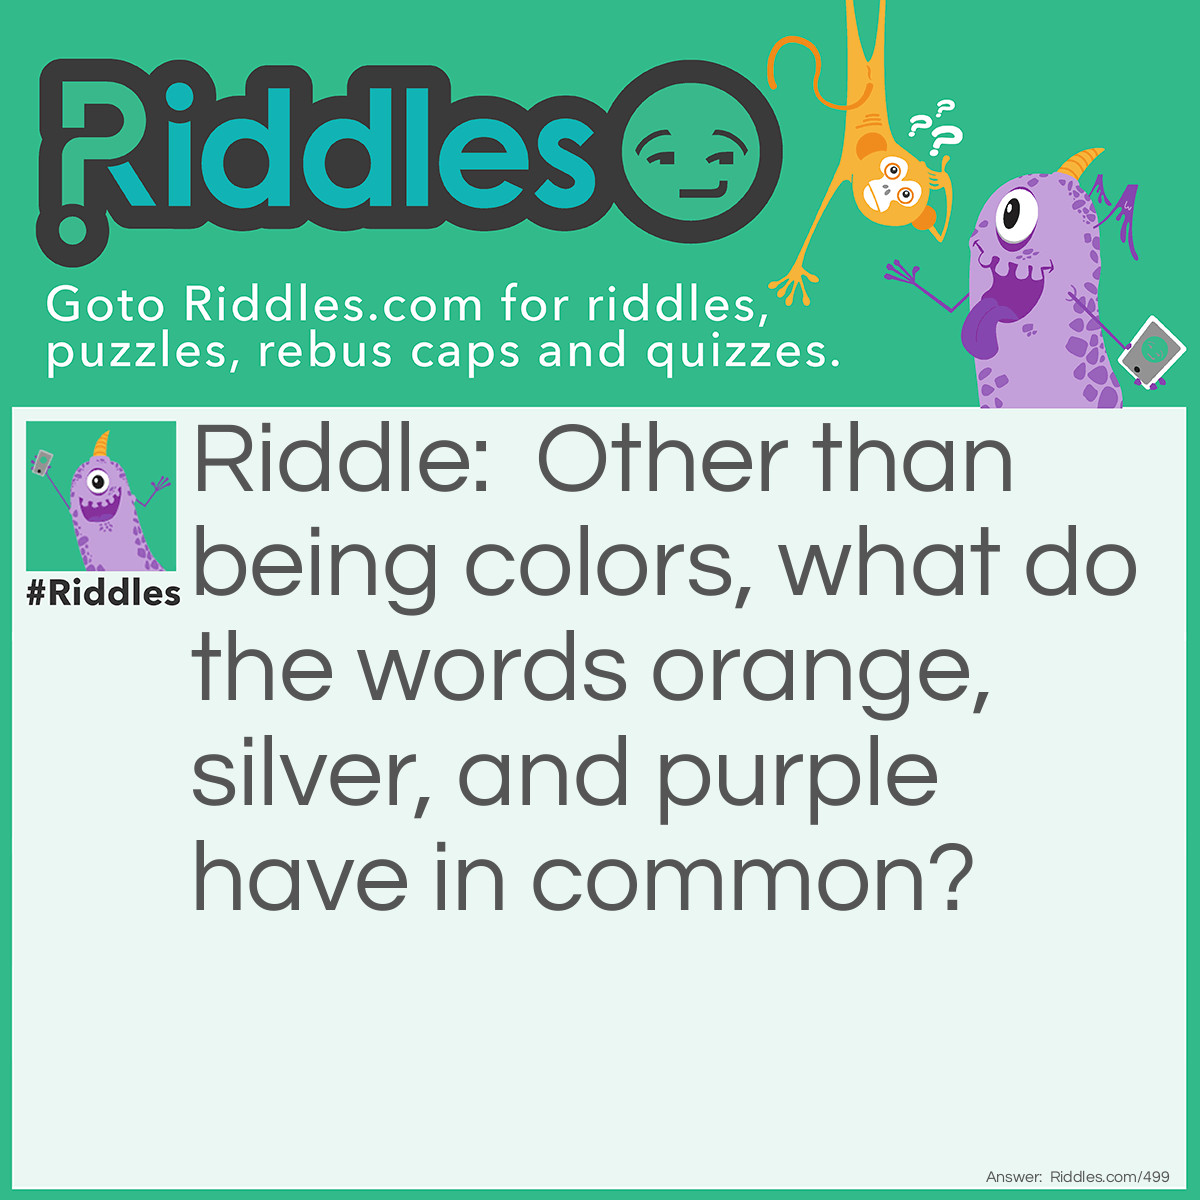 Riddle: Other than being colors, what do the words orange, silver, and purple have in common? Answer: There are no words in the English language that rhyme with them.